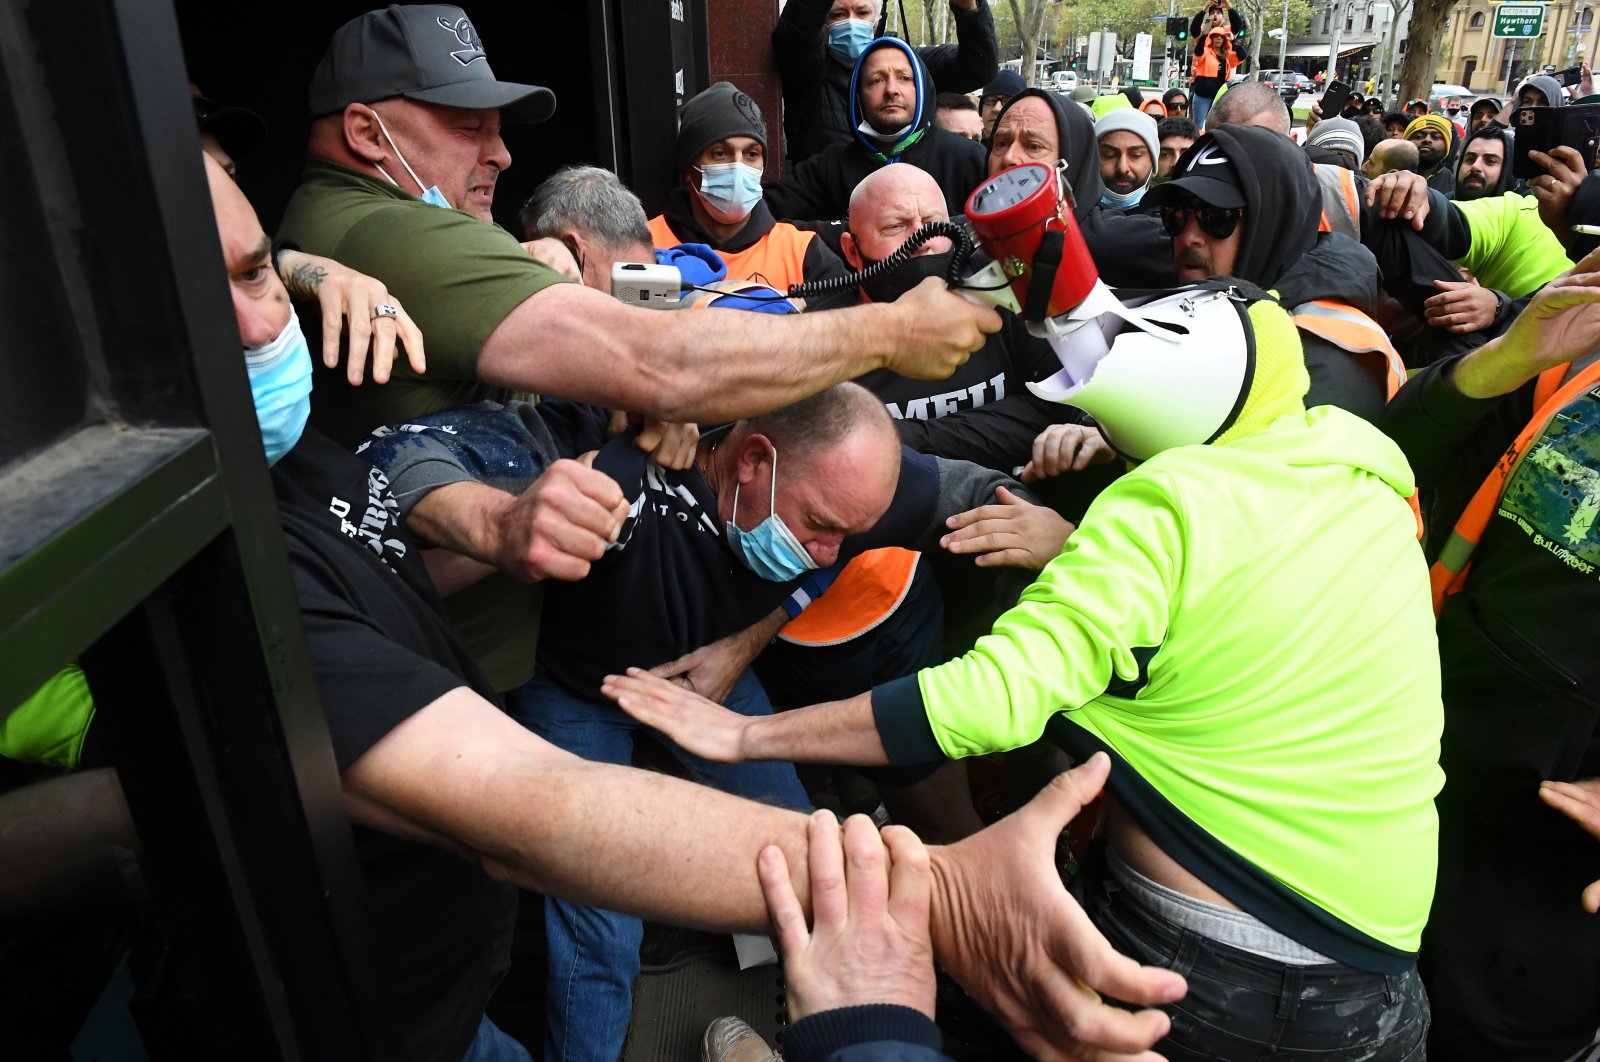 Construction workers clash with unionists at a protest at the Construction, Forestry, Maritime, Mining and Energy Union (CFMEU) headquarters in Melbourne, Victoria, Australia, Sept. 20, 2021.(EPA-EFE Photo)